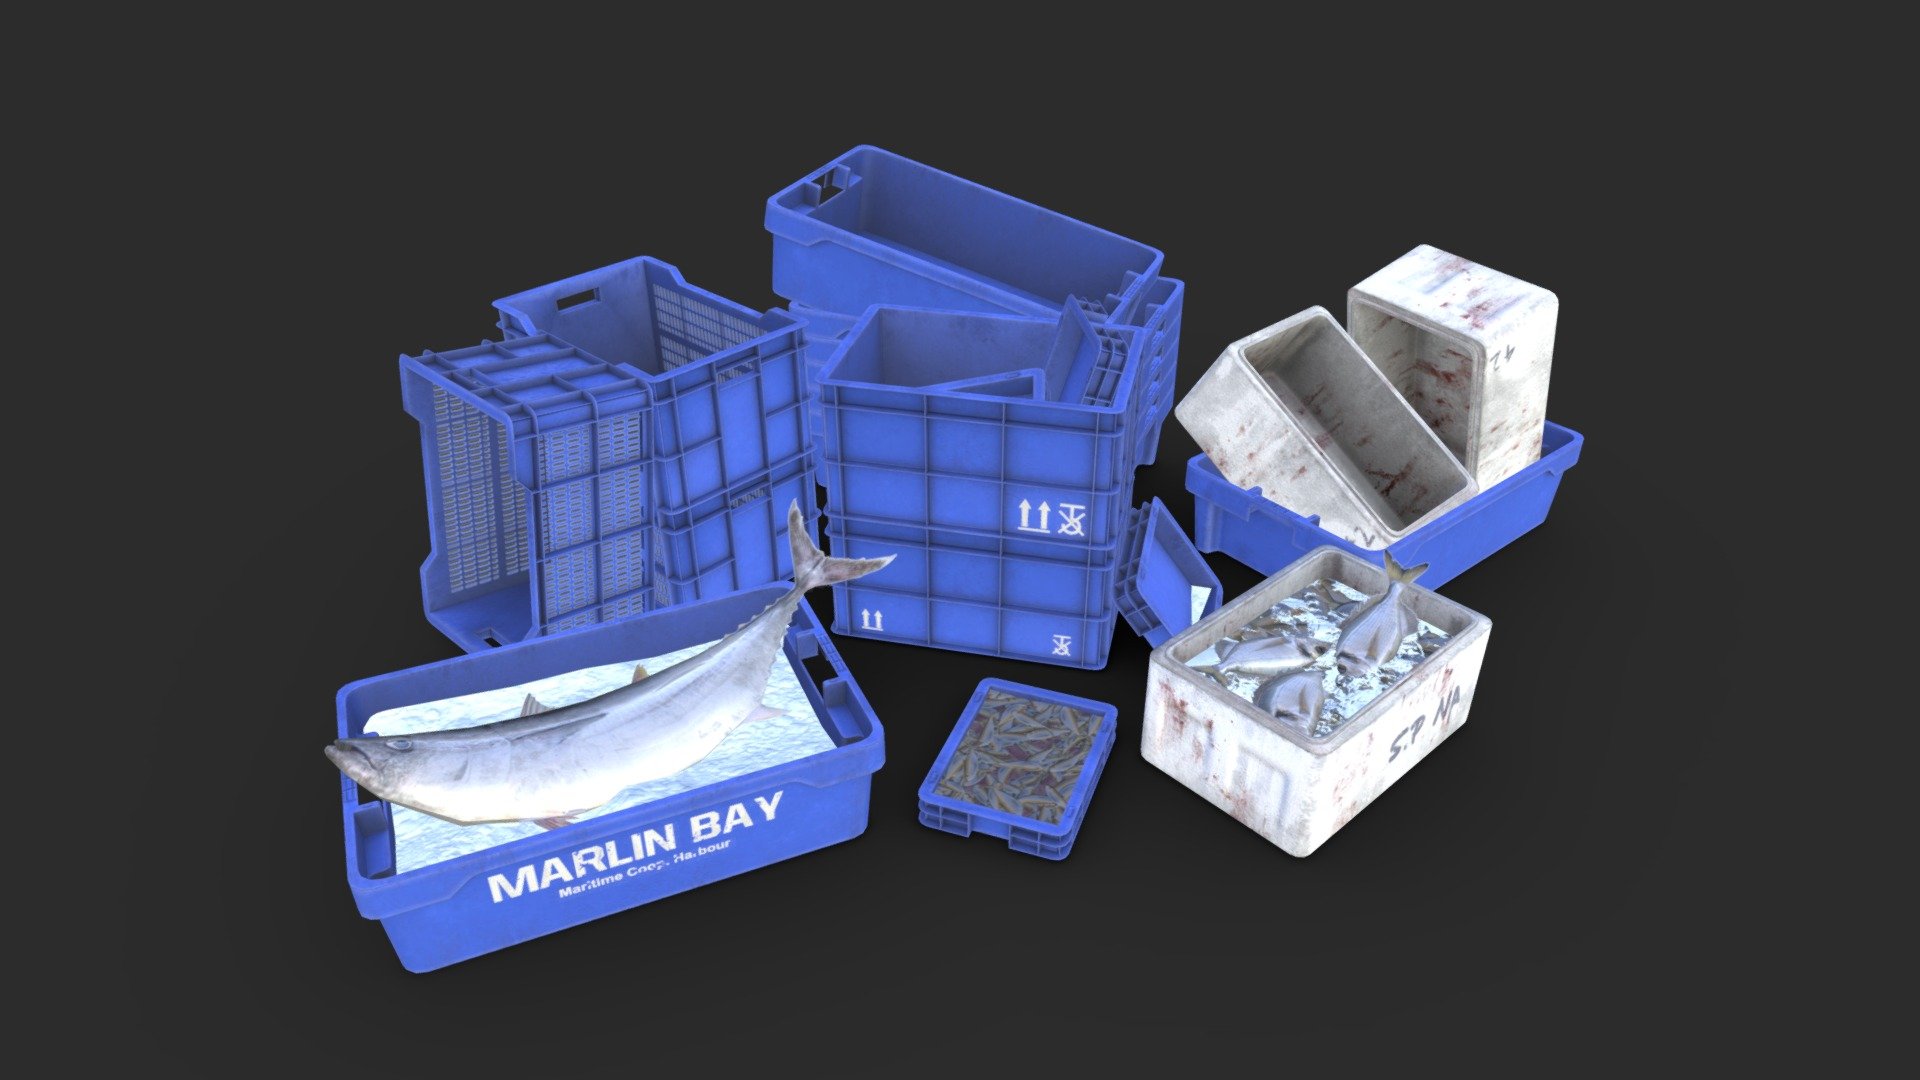 This fishing crates includes 4 LODs and colliders to be ready for game and available in lowpoly and PBR ready. This big pack includes a total of 44 objects (25 individuals &amp; 19 prefabs). The set is like a modular one to give you undreds of variants to make. Also, the crate material includes 6 Base Color variants (Blue, Red, Yellow, Orange, Green &amp; Grey).

This AAA game fisher crates &amp; fishes will embellish you scene and add more details which can help the gameplay and the game-design or level-design.

Low-poly model &amp; Blender native 3.4

SPECIFICATIONS




Objects : 44

Polygons : 19556

GAME SPECS




LODs : Yes (inside FBX for Unity &amp; Unreal)

Numbers of LODs : 4

Collider : Yes

EXPORTED FORMATS




FBX

Collada

OBJ

TEXTURES




Materials in scene : 2

Textures sizes : 4K for Crates &amp; 2K for Fishes

Textures types : Base Color, Metallic, Roughness, Normal (DirectX &amp; OpenGL), Heigh, AO (also Unity &amp; Unreal ARM workflow maps)

Textures format : PNG
 - Fishing Plastic Crates - Buy Royalty Free 3D model by KangaroOz 3D (@KangaroOz-3D) 3d model